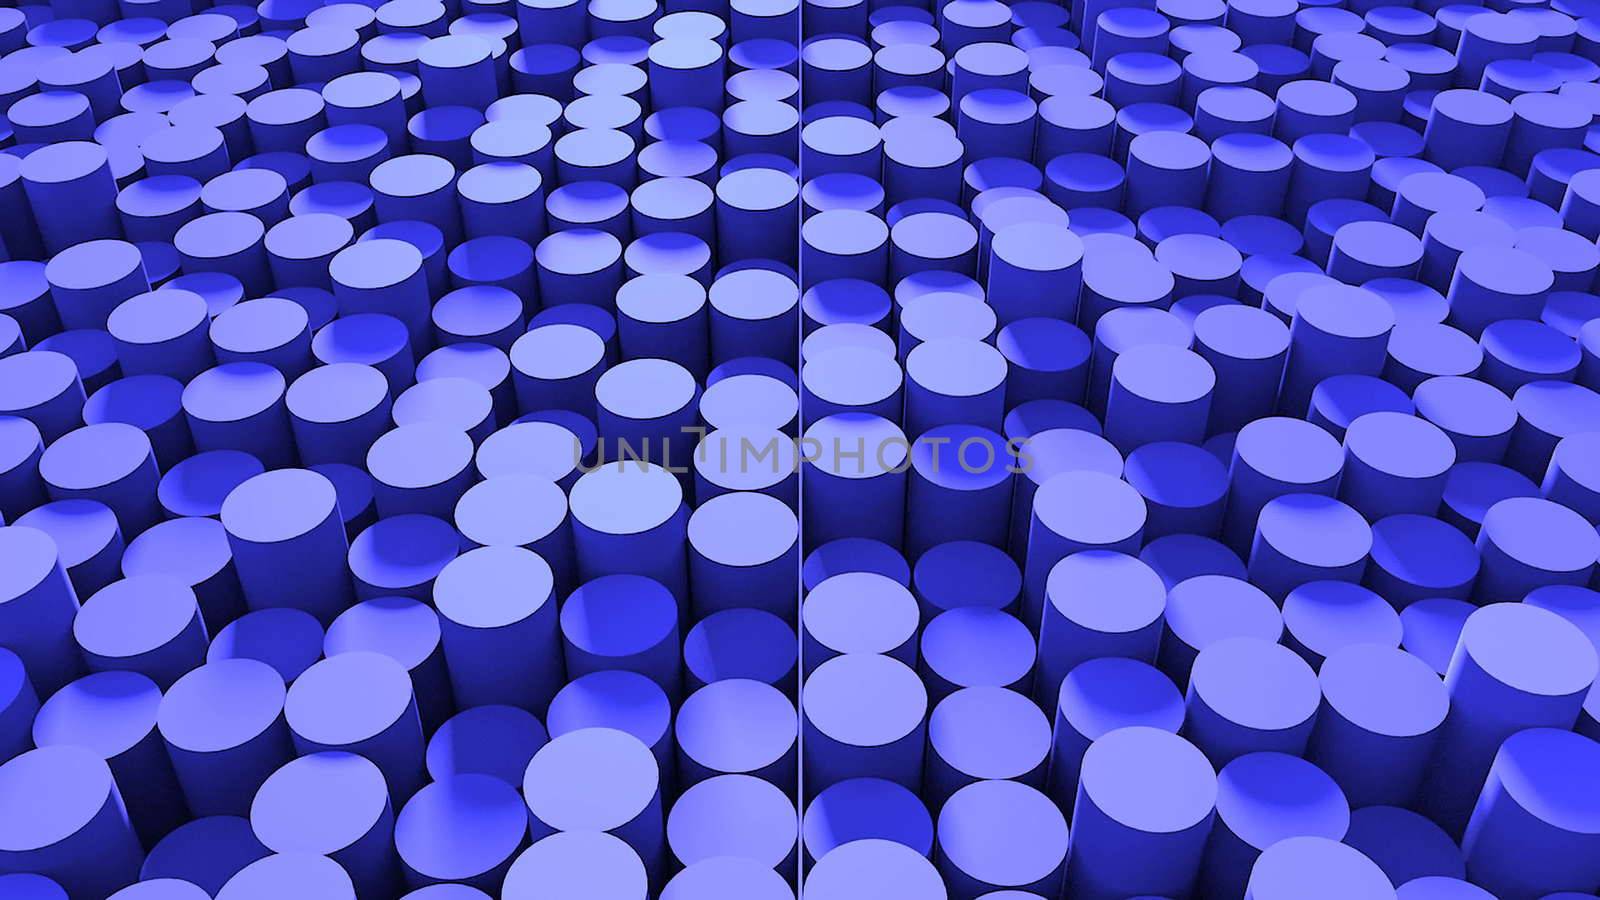 Abstract background with cylinders. Digital illustration. 3d rendering